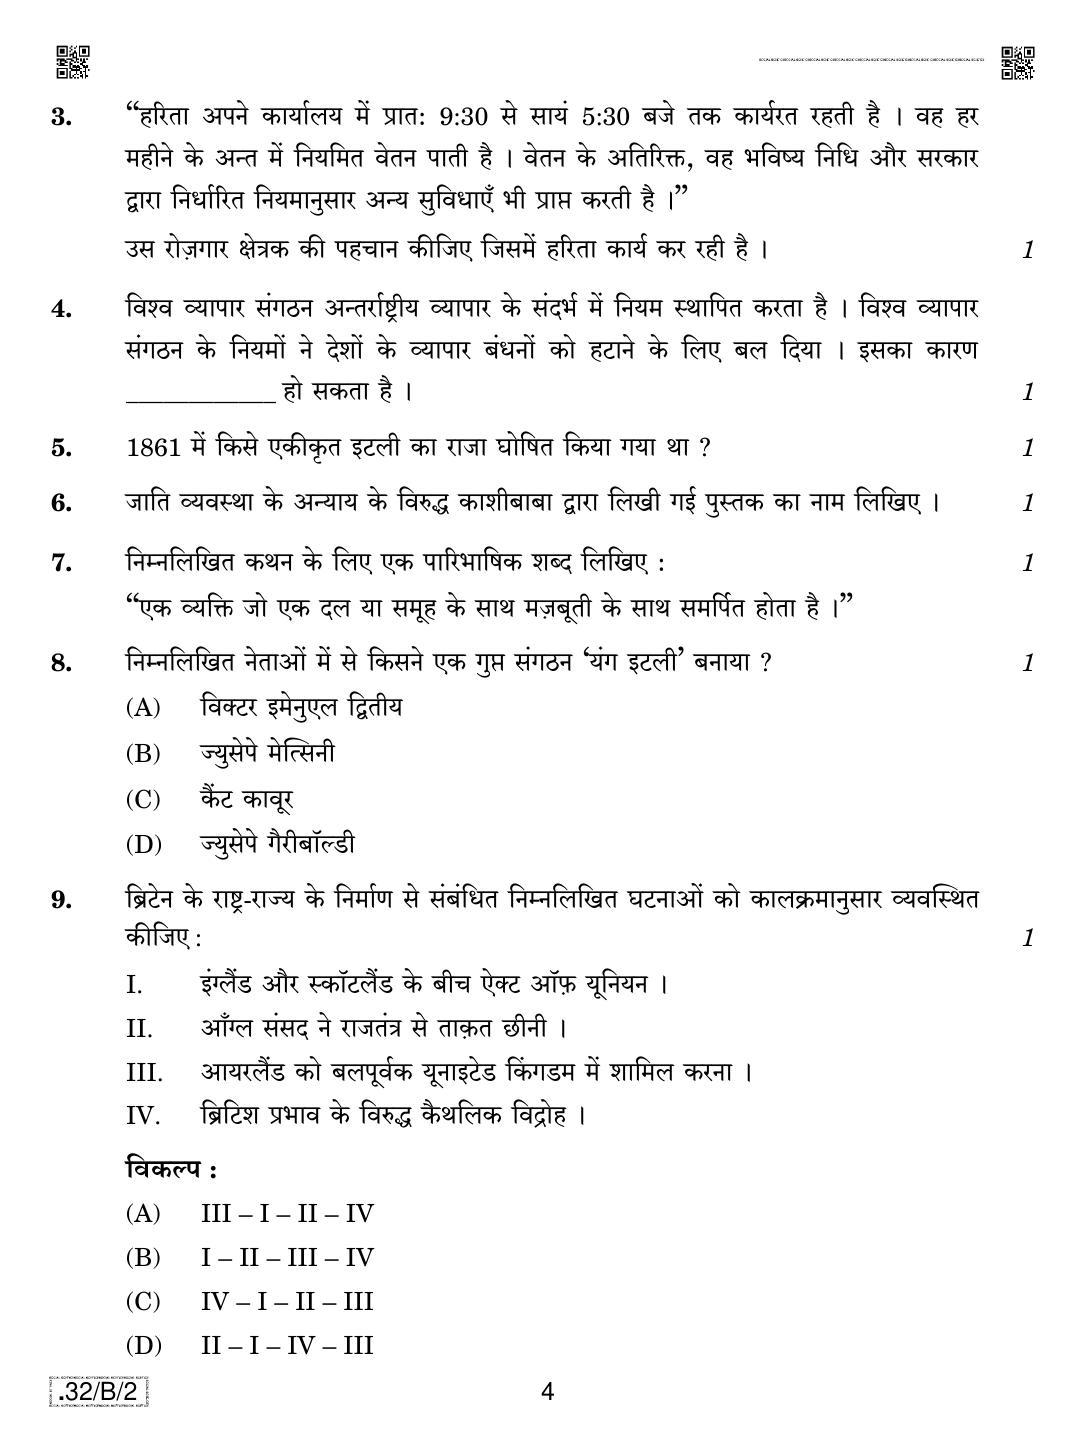 CBSE Class 10 32-C-2 Social Science 2020 Compartment Question Paper - Page 4